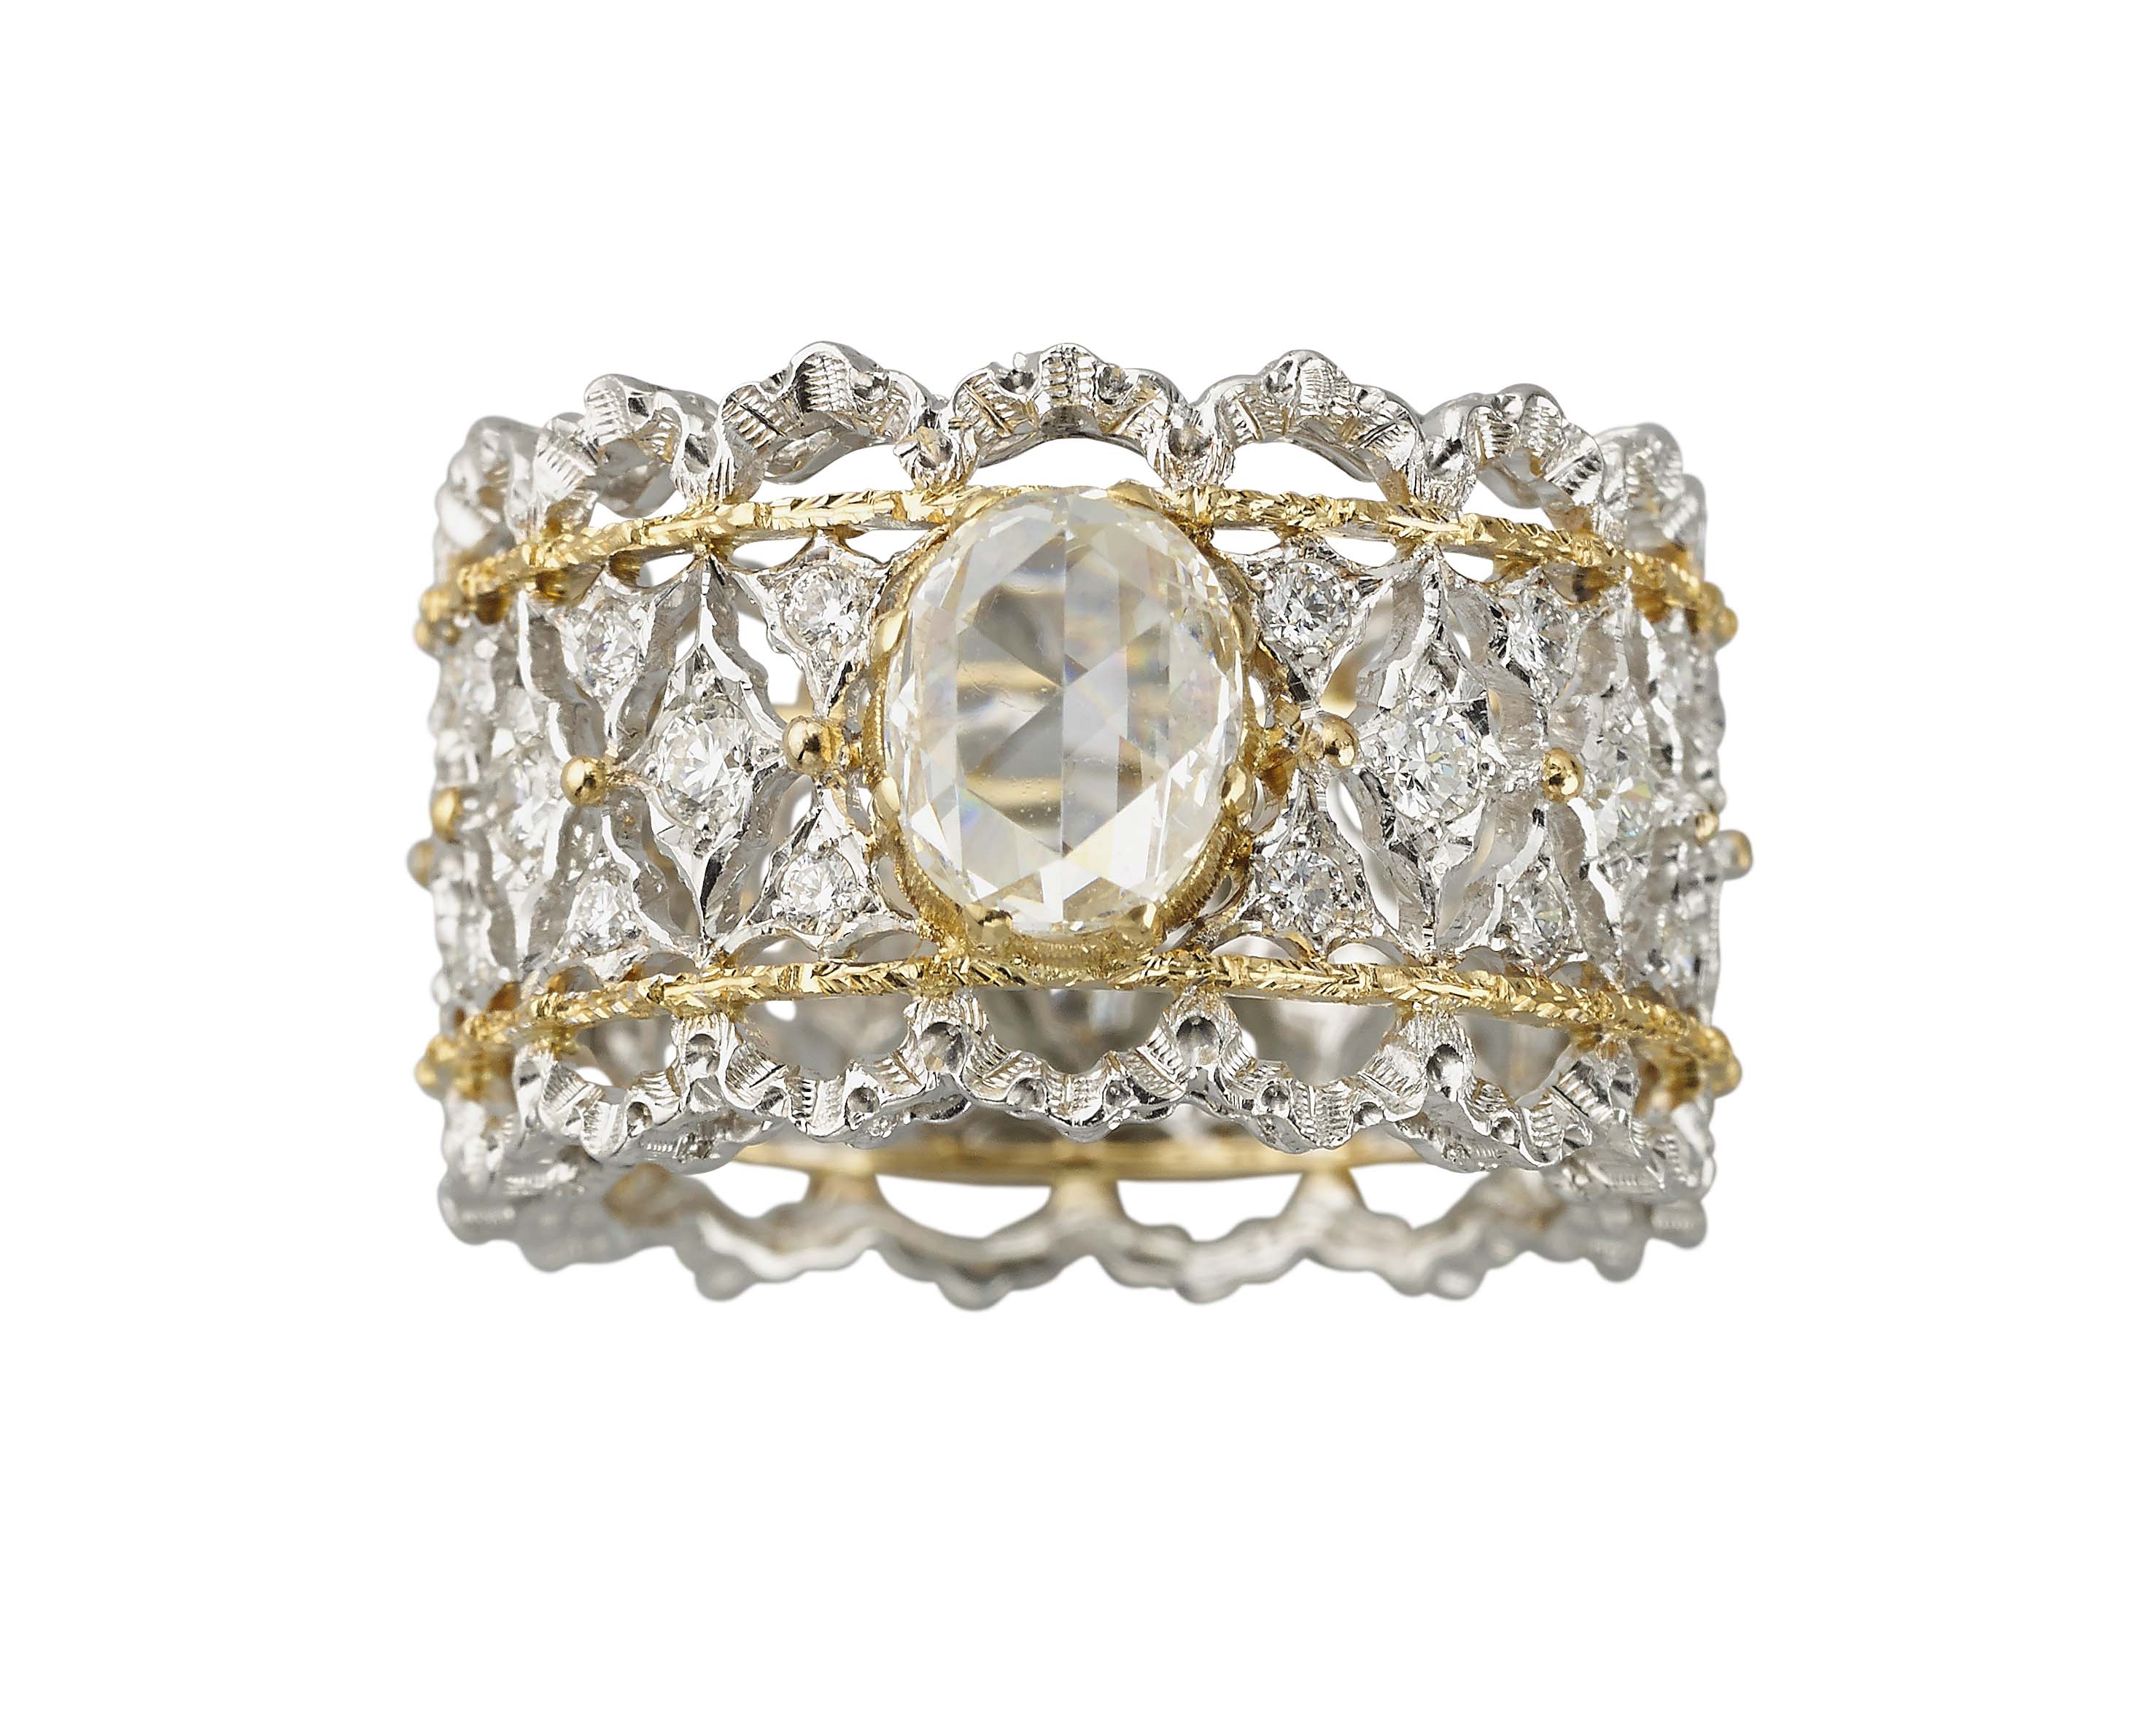 Introducing The Lastest High Jewelry Collection From Buccellati